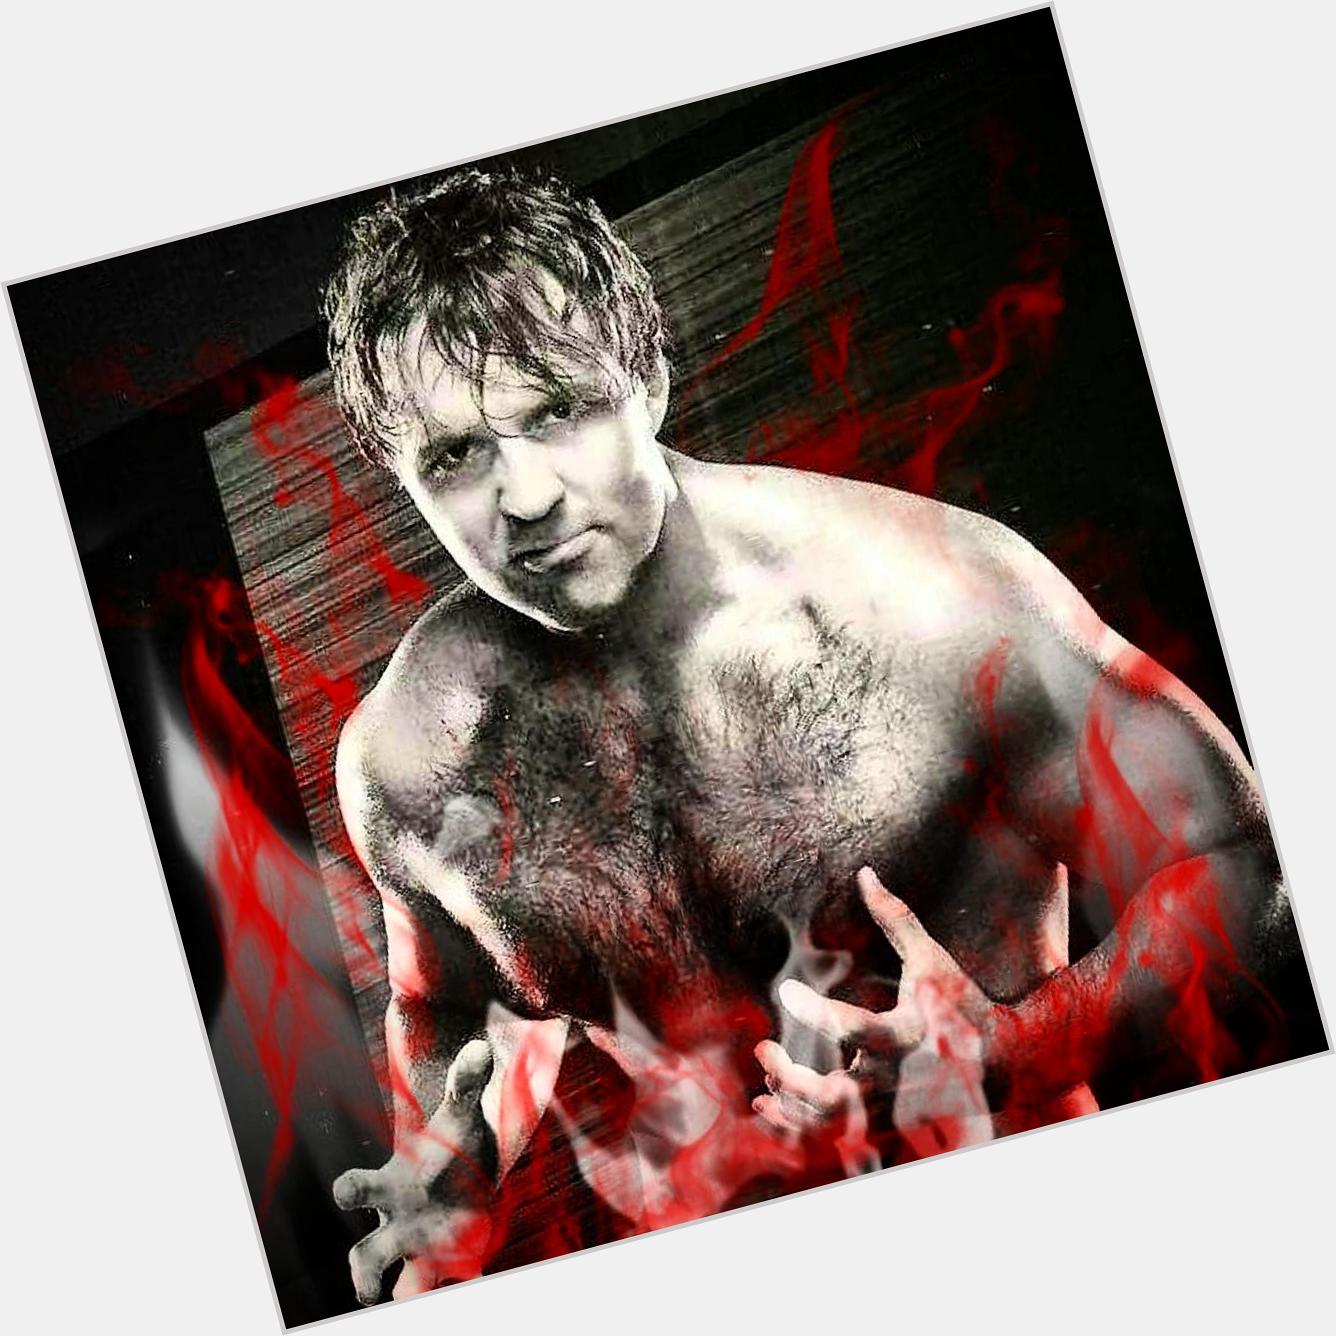 Happy Birthday to without a doubt one of the best pro wrestlers today. Dean Ambrose!   